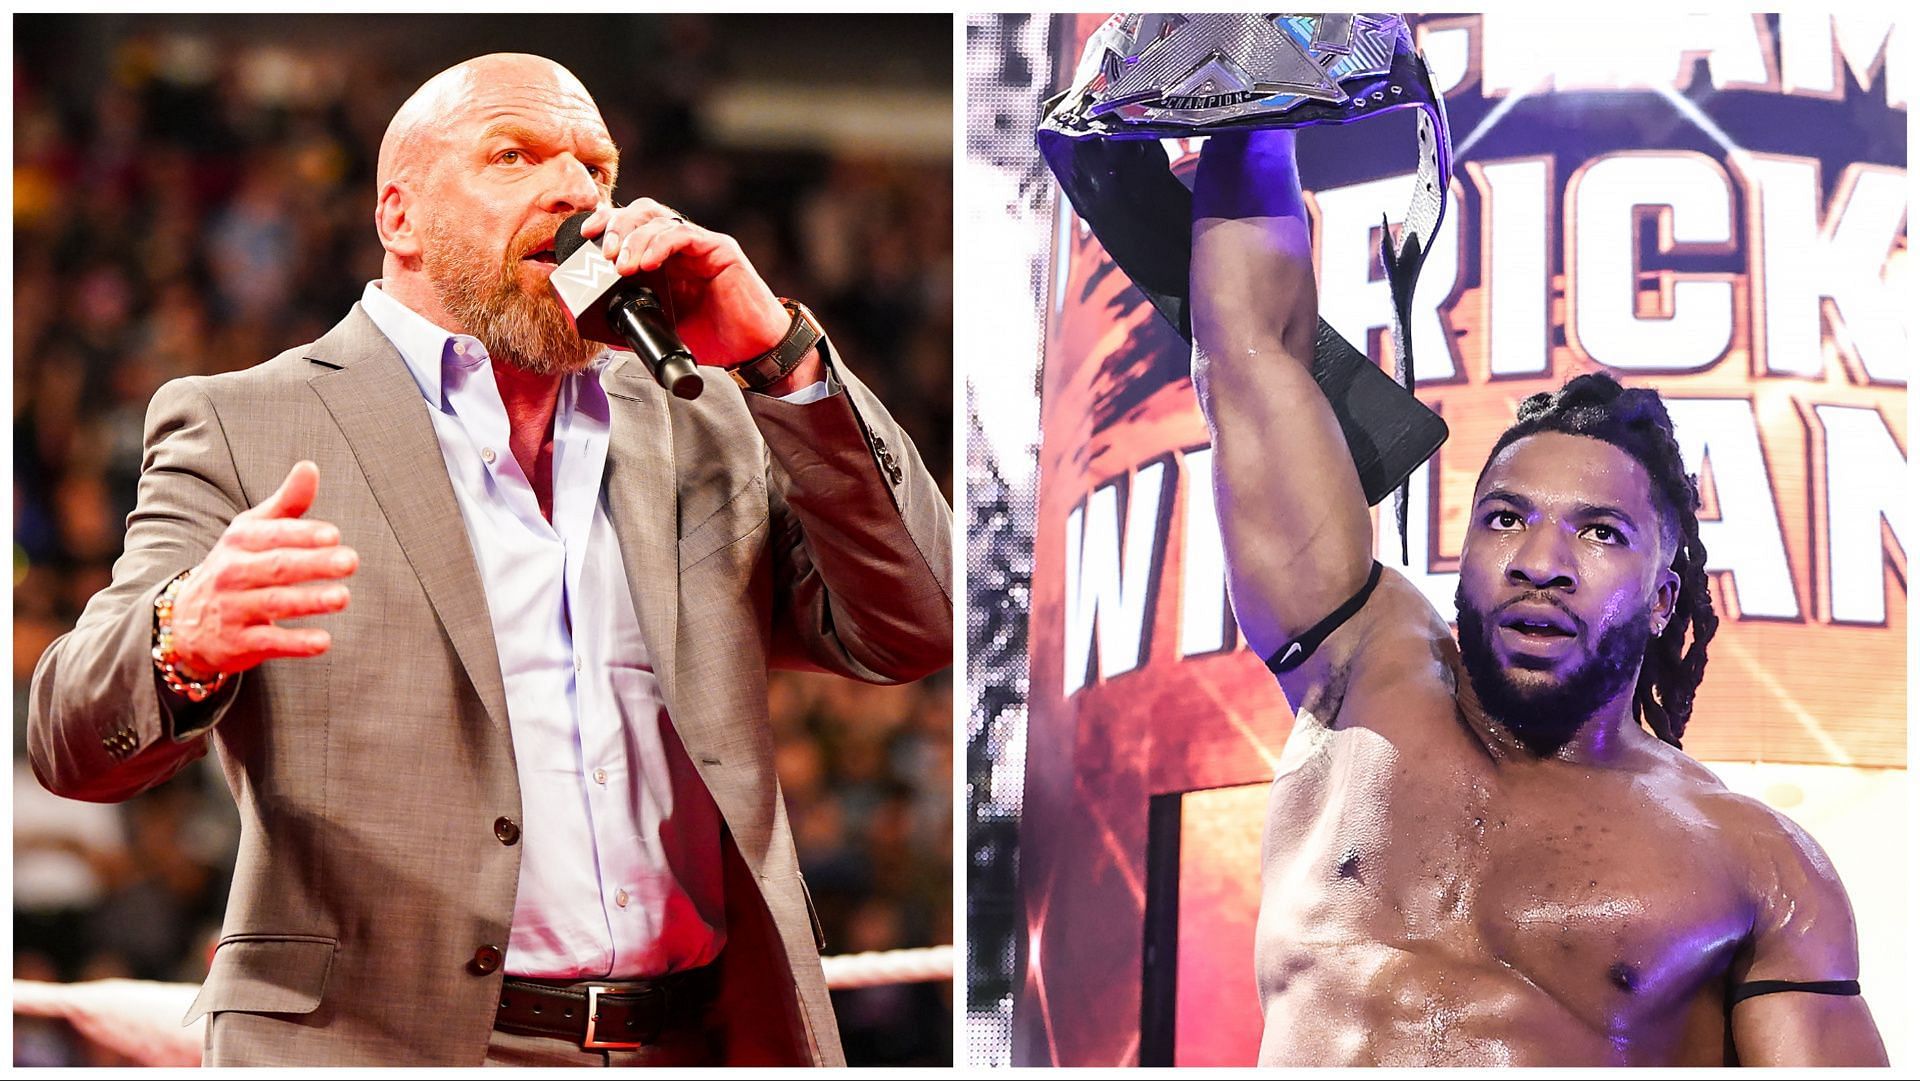 Triple H speaks on WWE RAW, Trick Williams celebrates with the WWE NXT Championship